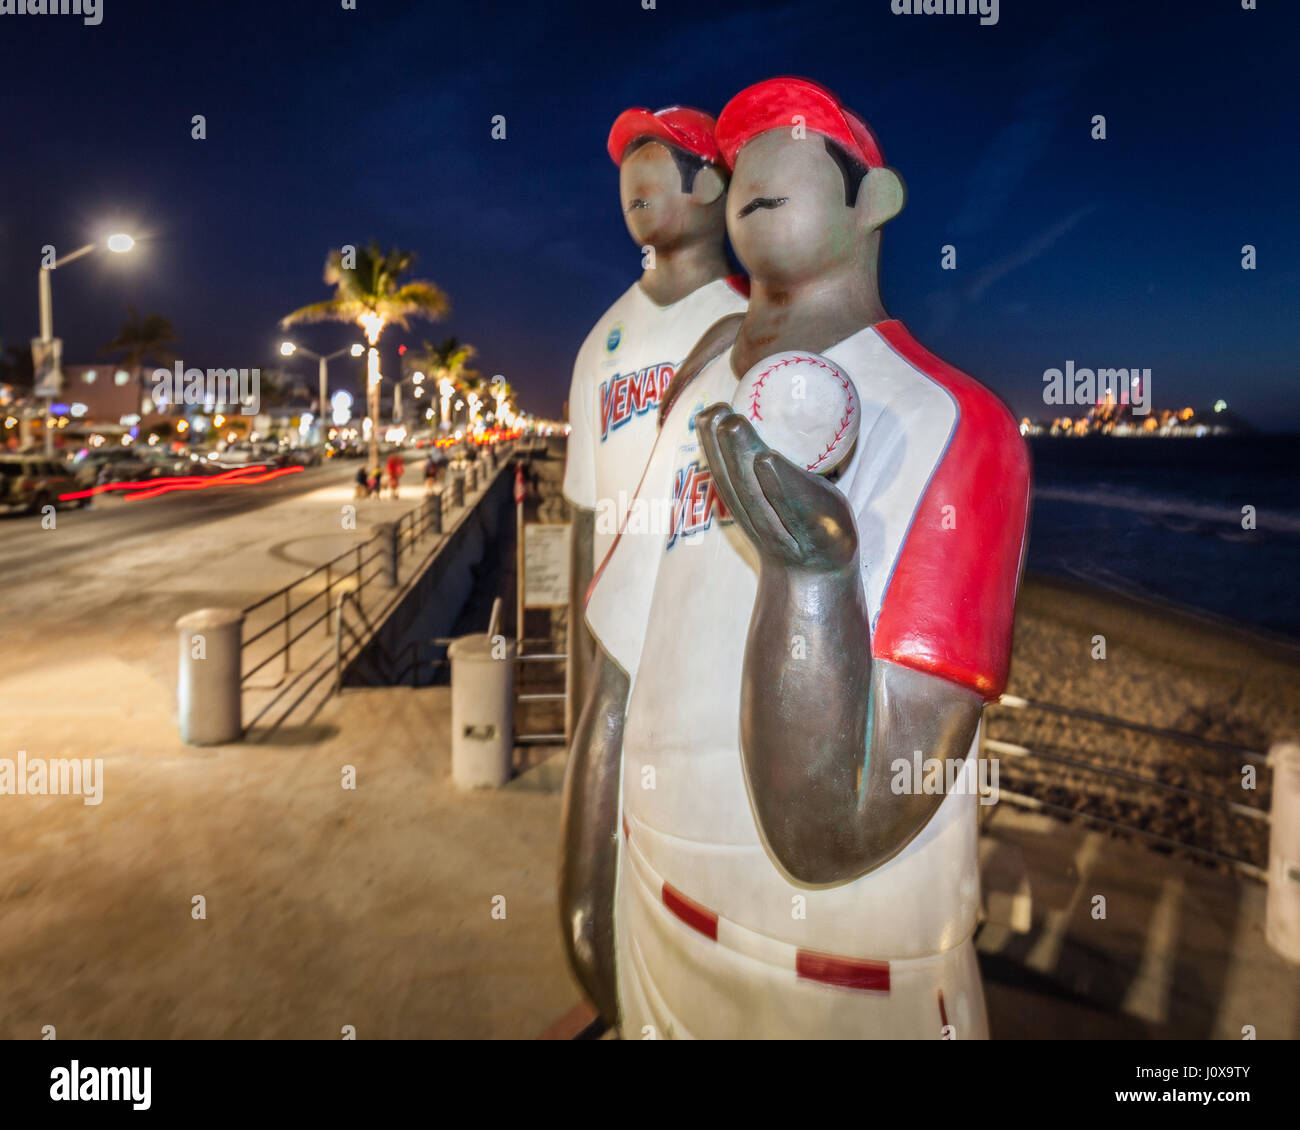 Sculpture called 'Los Peloteros' of two baseball players from the local team in Mazatlan, Mexico. Stock Photo